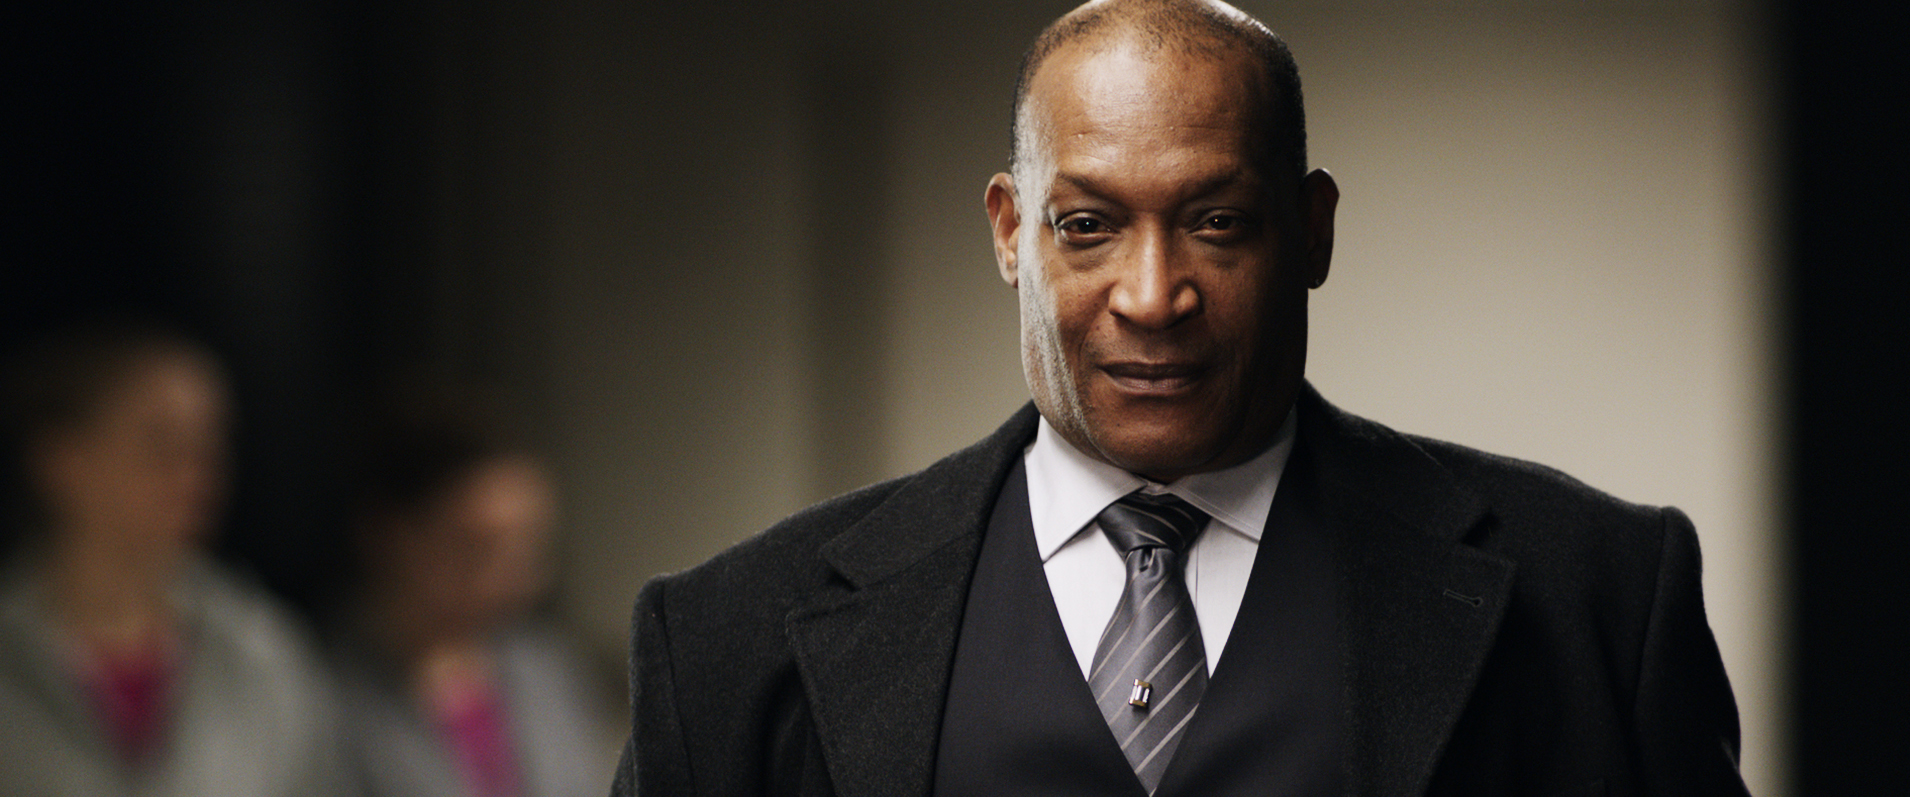 Tony Todd - Wallpaper Colection